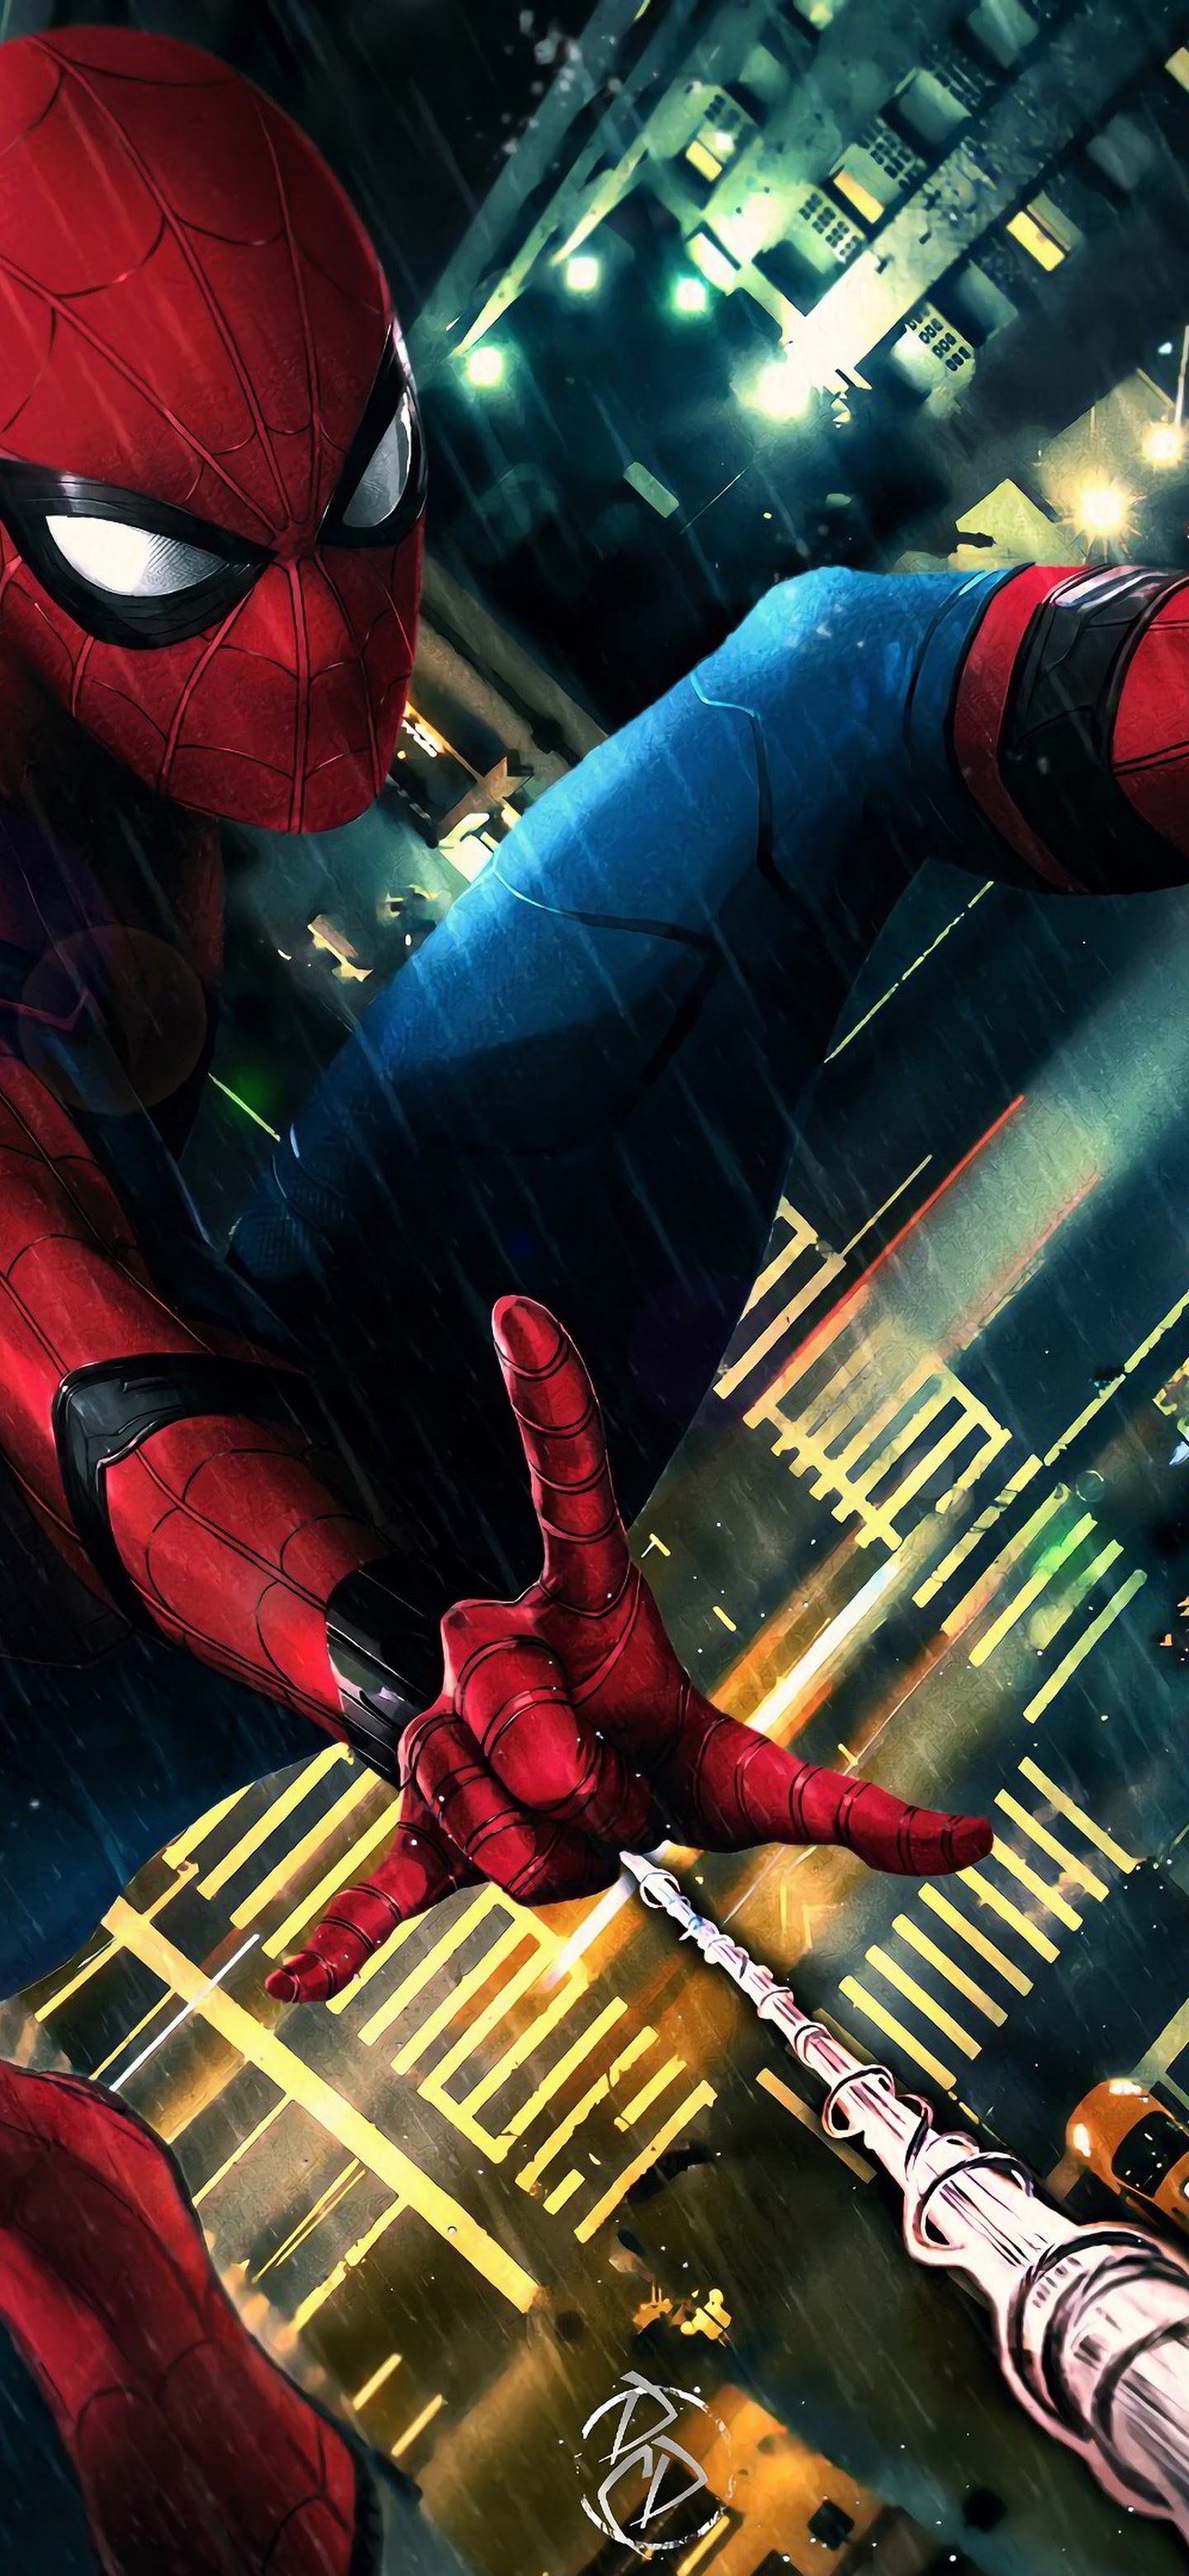 Featured image of post Spider Man 4K Wallpaper For Mobile / #universo #spiderman #universe #marvel #spider man un nuevo universo #spider man into the spider verse.